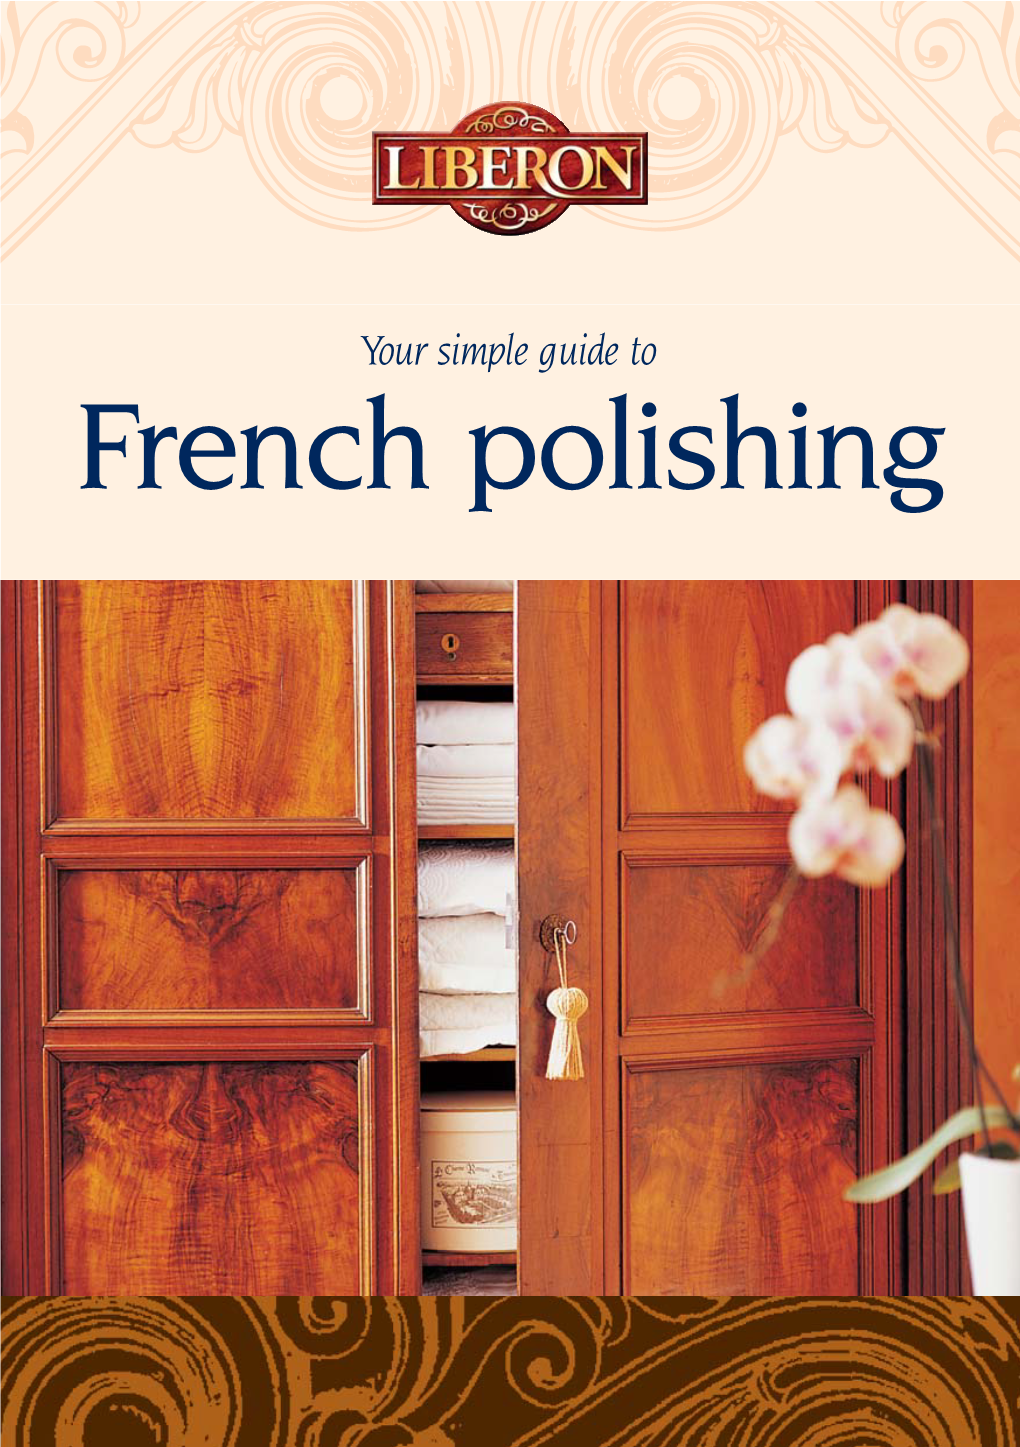 Simple Guide to French Polishing Manufacturer of Quality Finishes